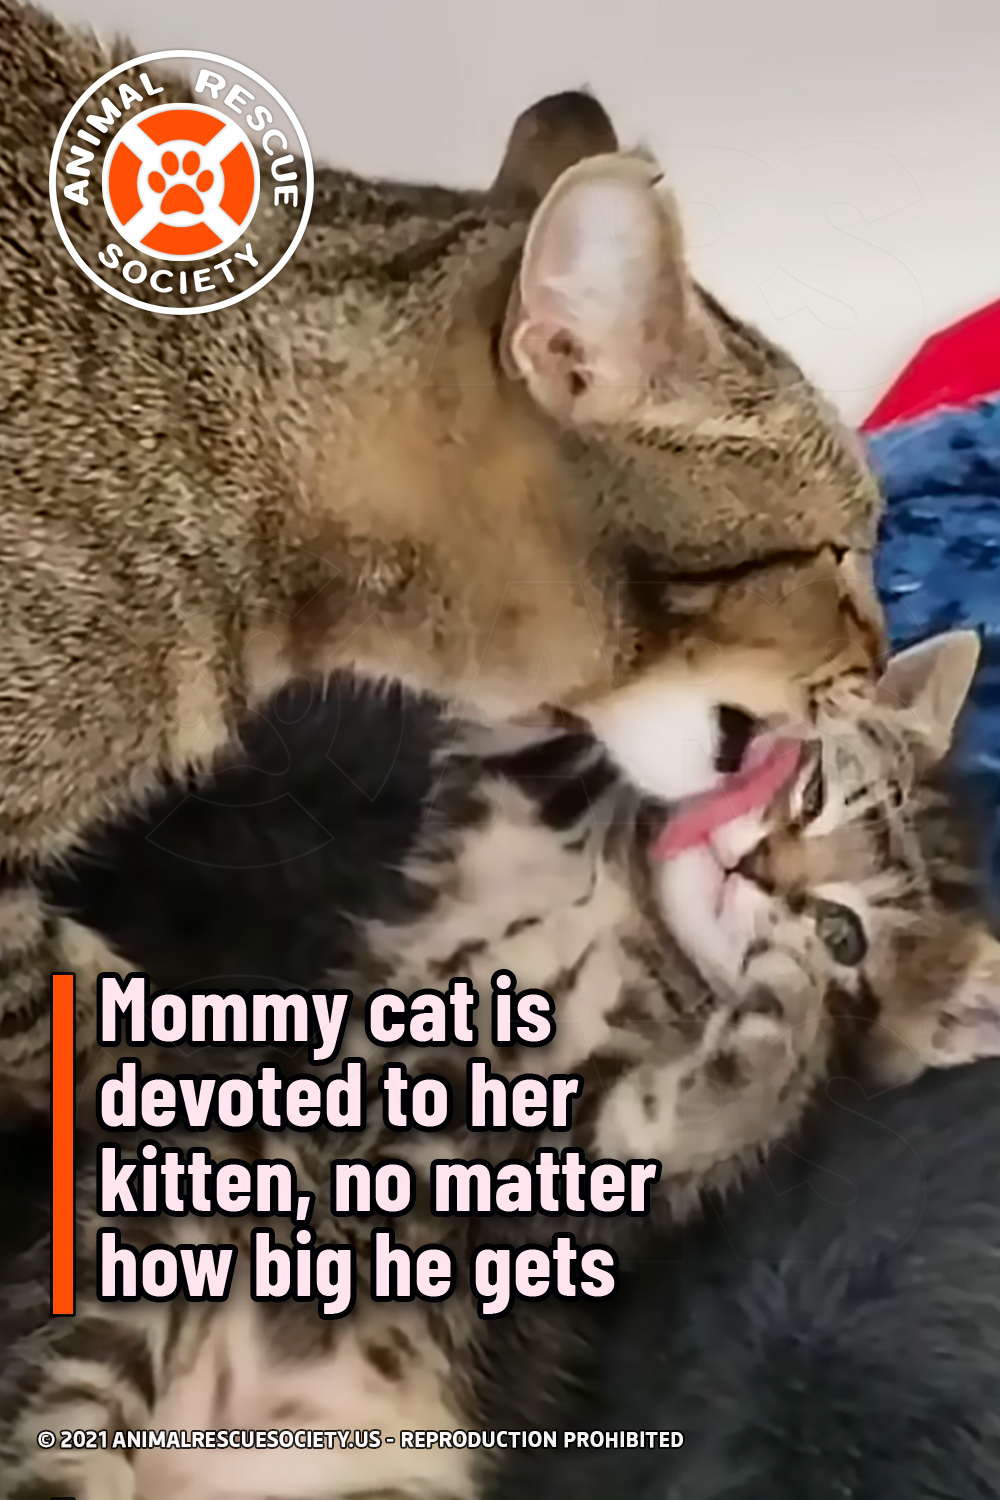 Mommy cat is devoted to her kitten, no matter how big he gets